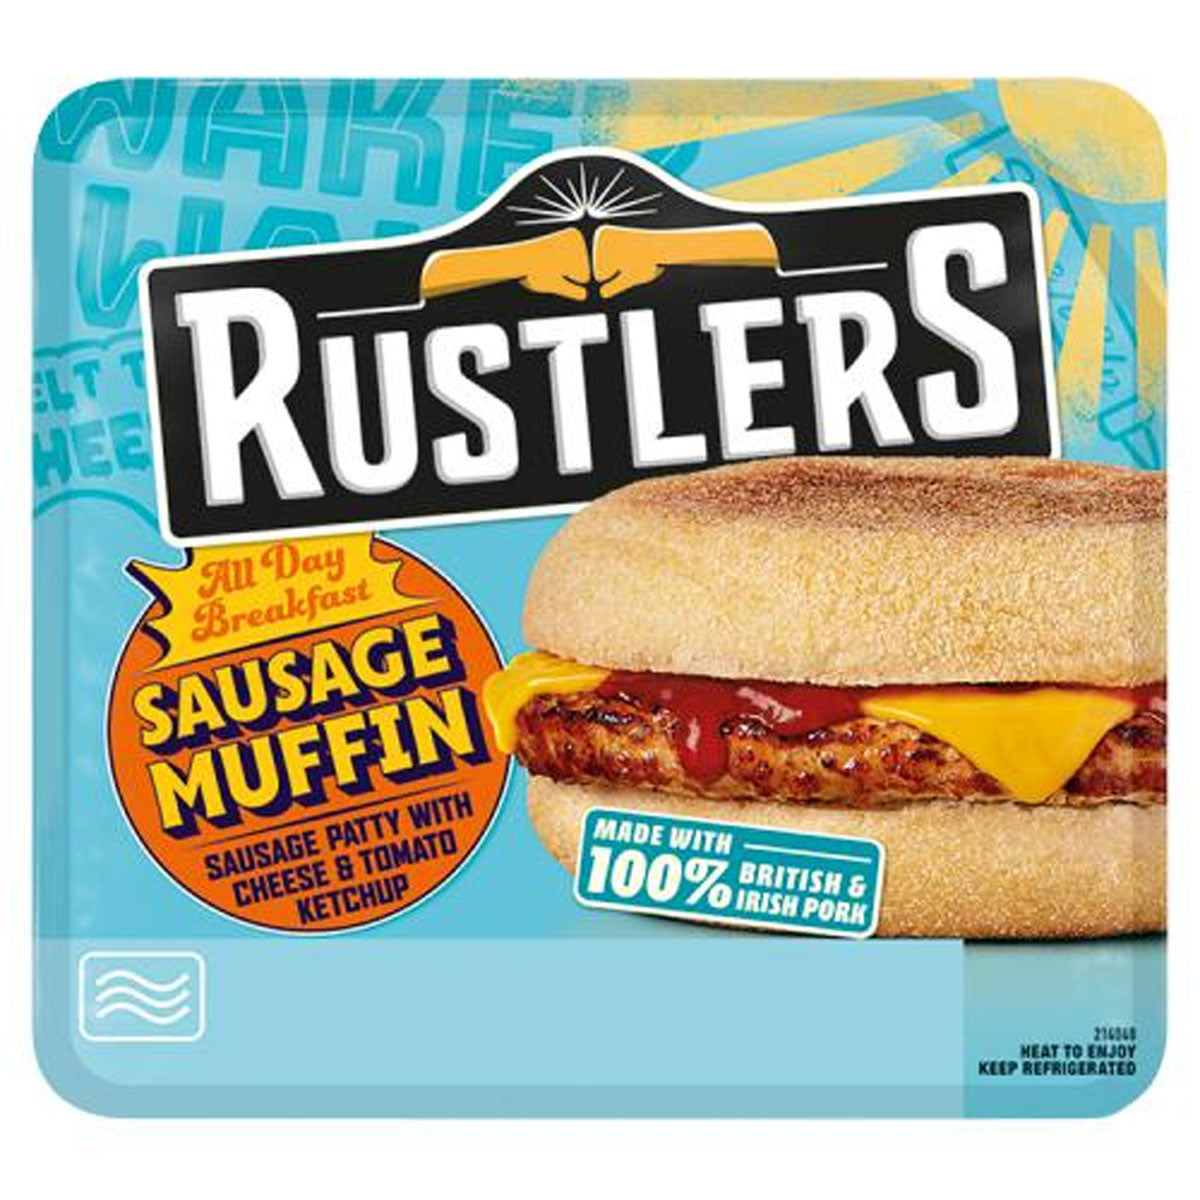 Rustlers - All Day Breakfast Sausage Muffin - 155g - Continental Food Store